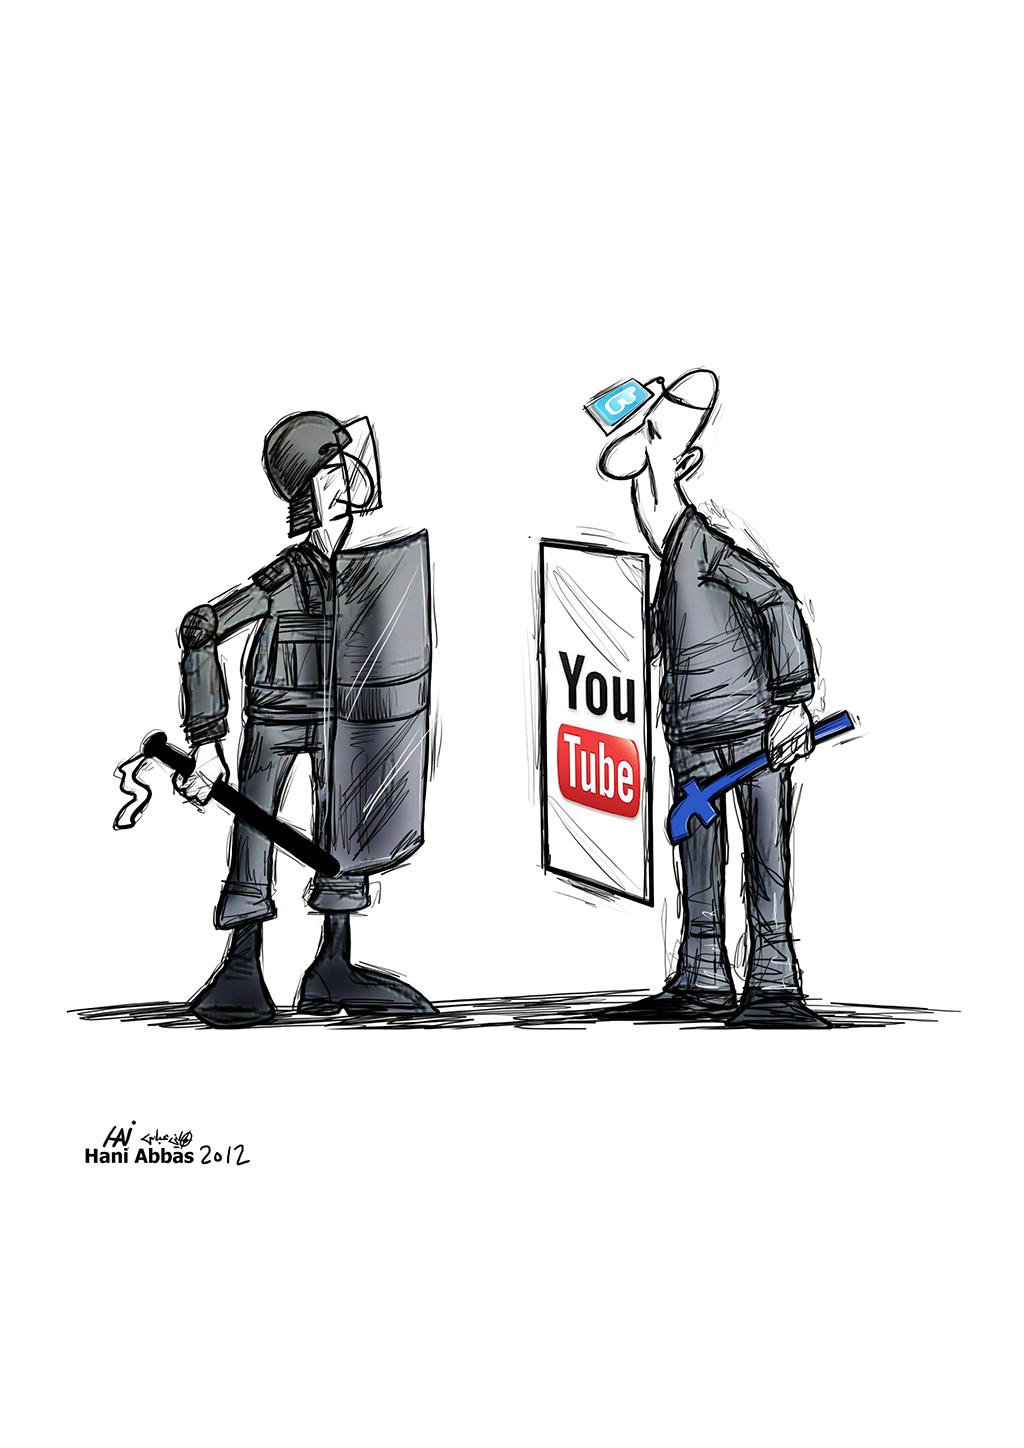 caricature: two figures with shields –internet as a weapon and another wearing riot gear